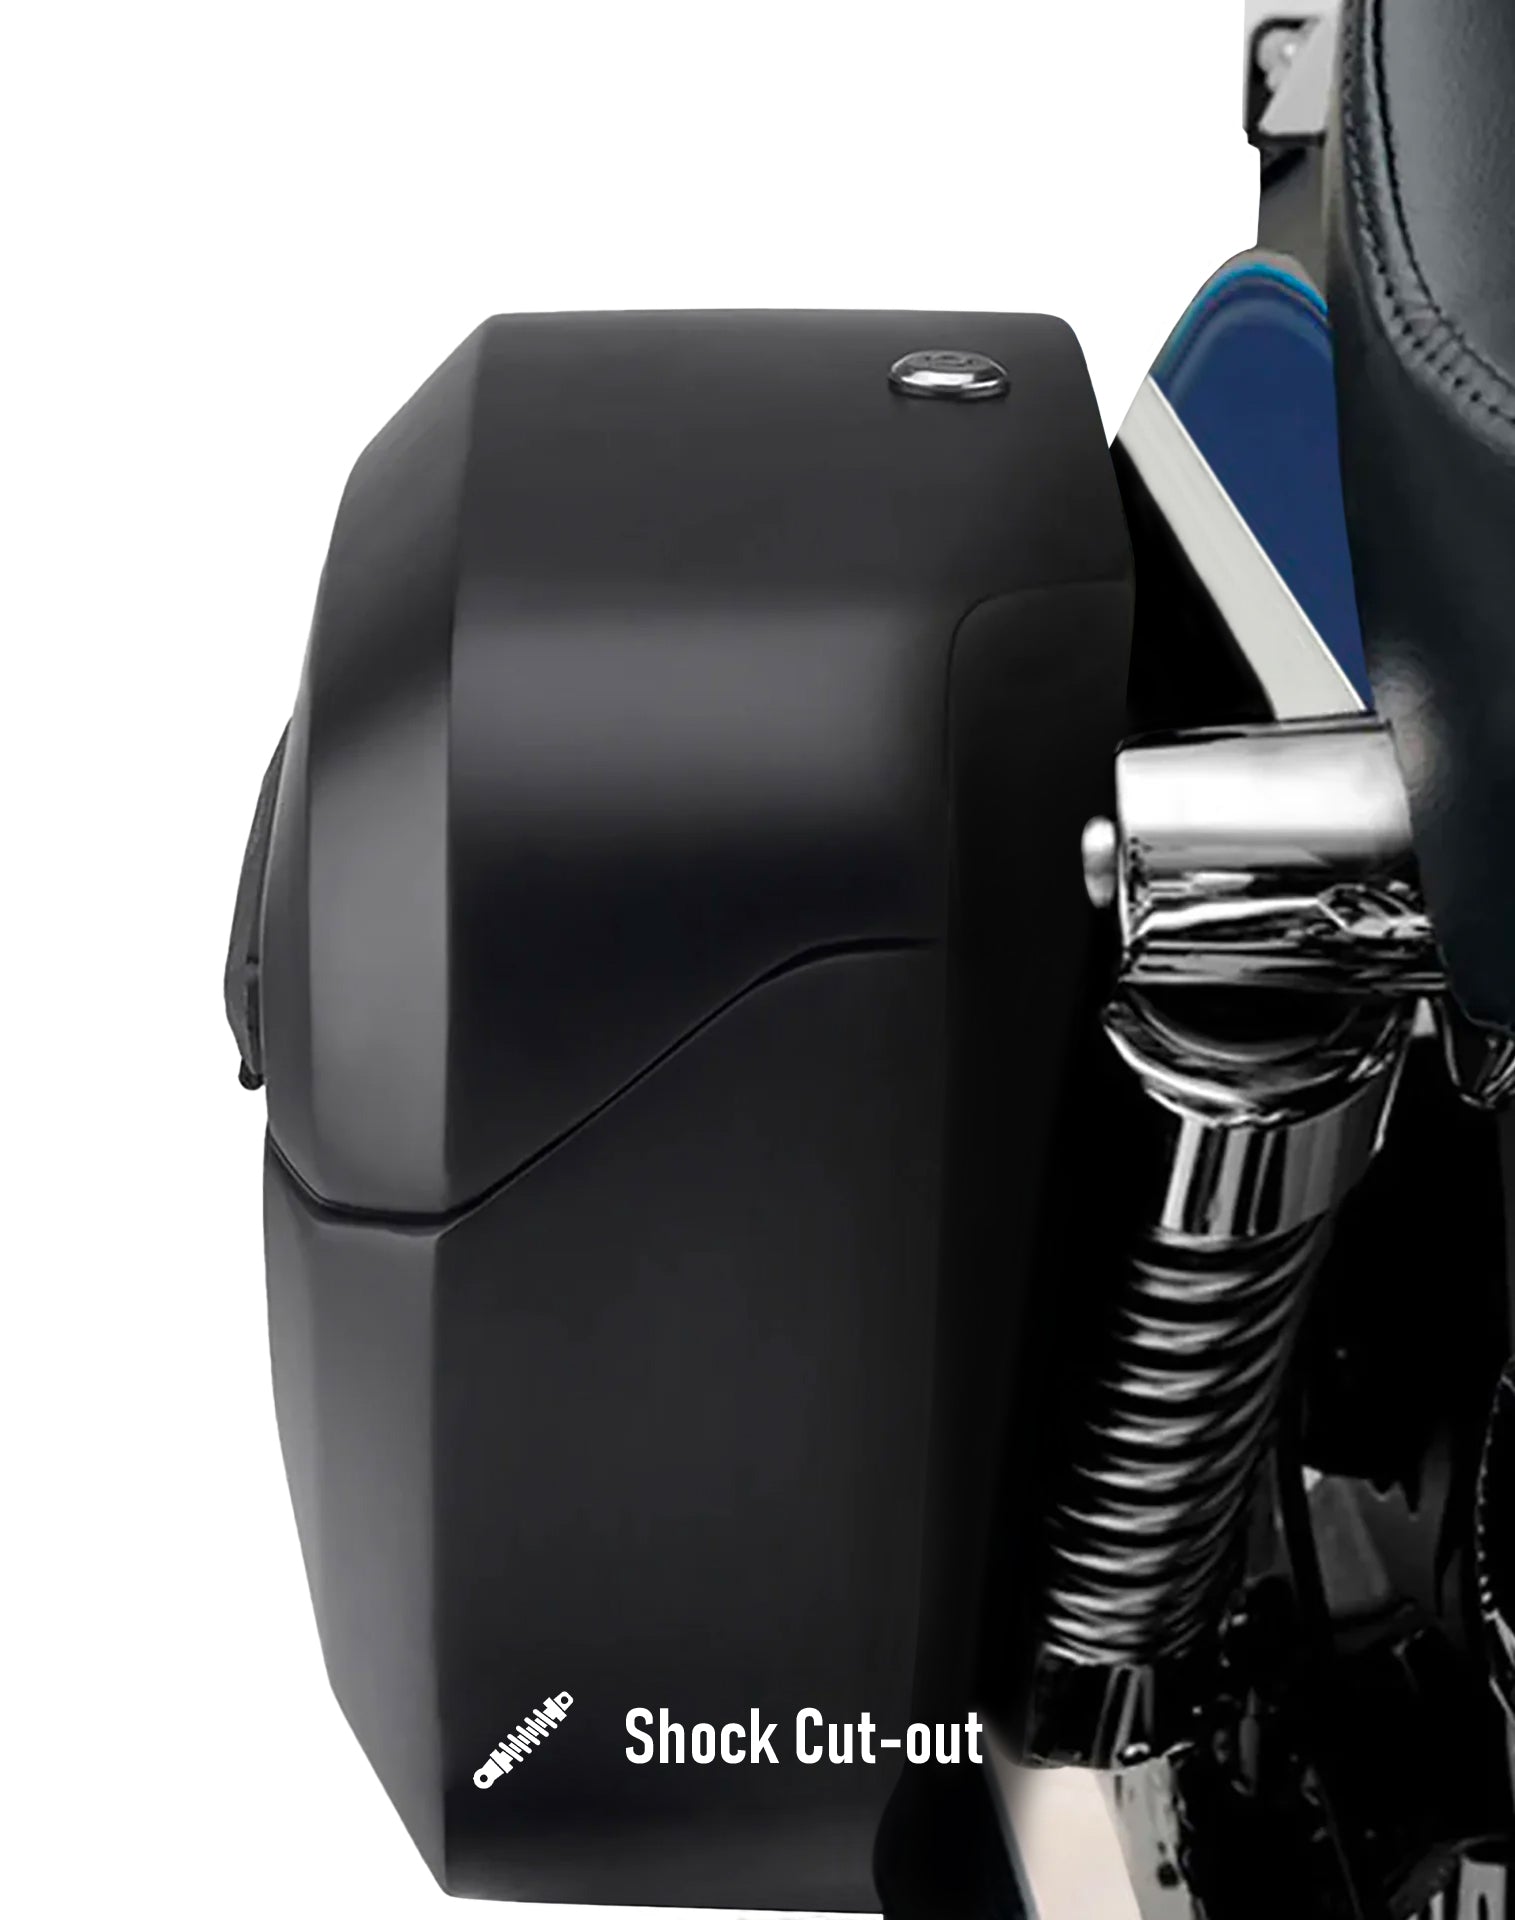 38L - Lamellar Vale Extra Large Shock Cut-out Honda Valkyrie 1500 Interstate Matte Motorcycle Hard Saddlebags Hard Shell Construction